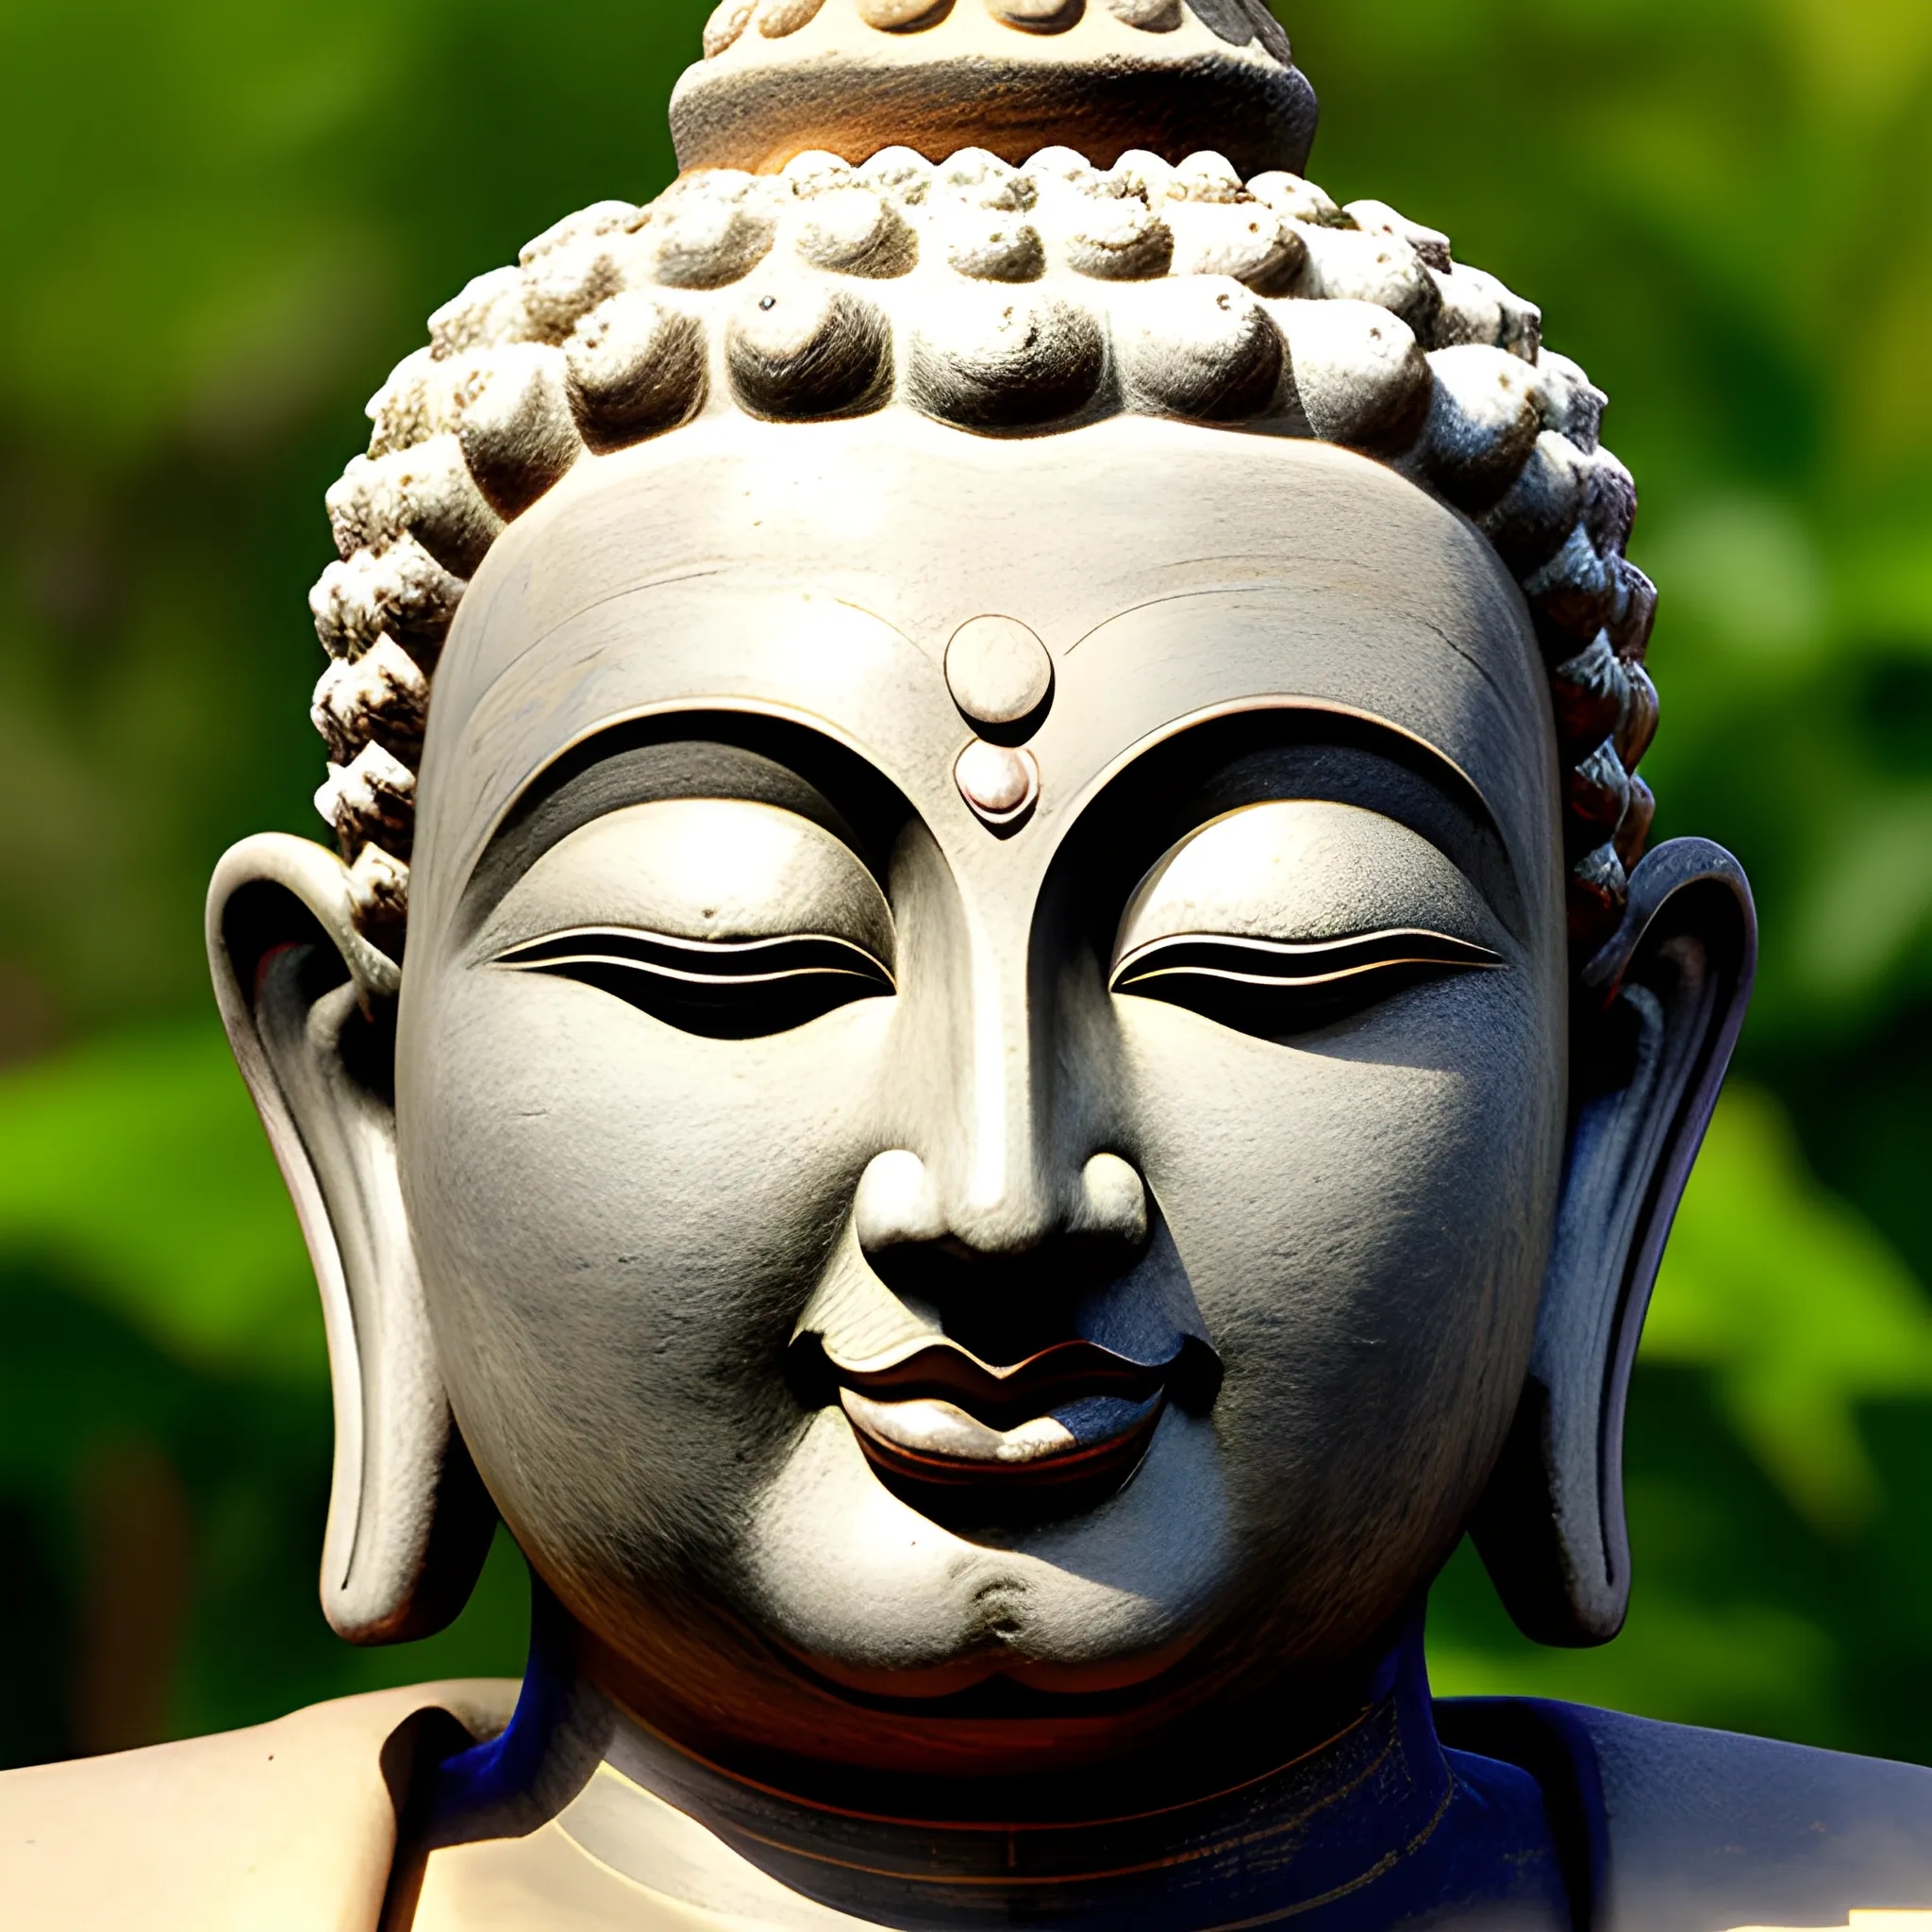 Buddha, the nose is wide and flat, the root of the nose is low or medium, the nasal process is small, the diameter of the nostril is large, the lips are protruding, the mouth is wide, the lips are thick, and the middle finger is raised